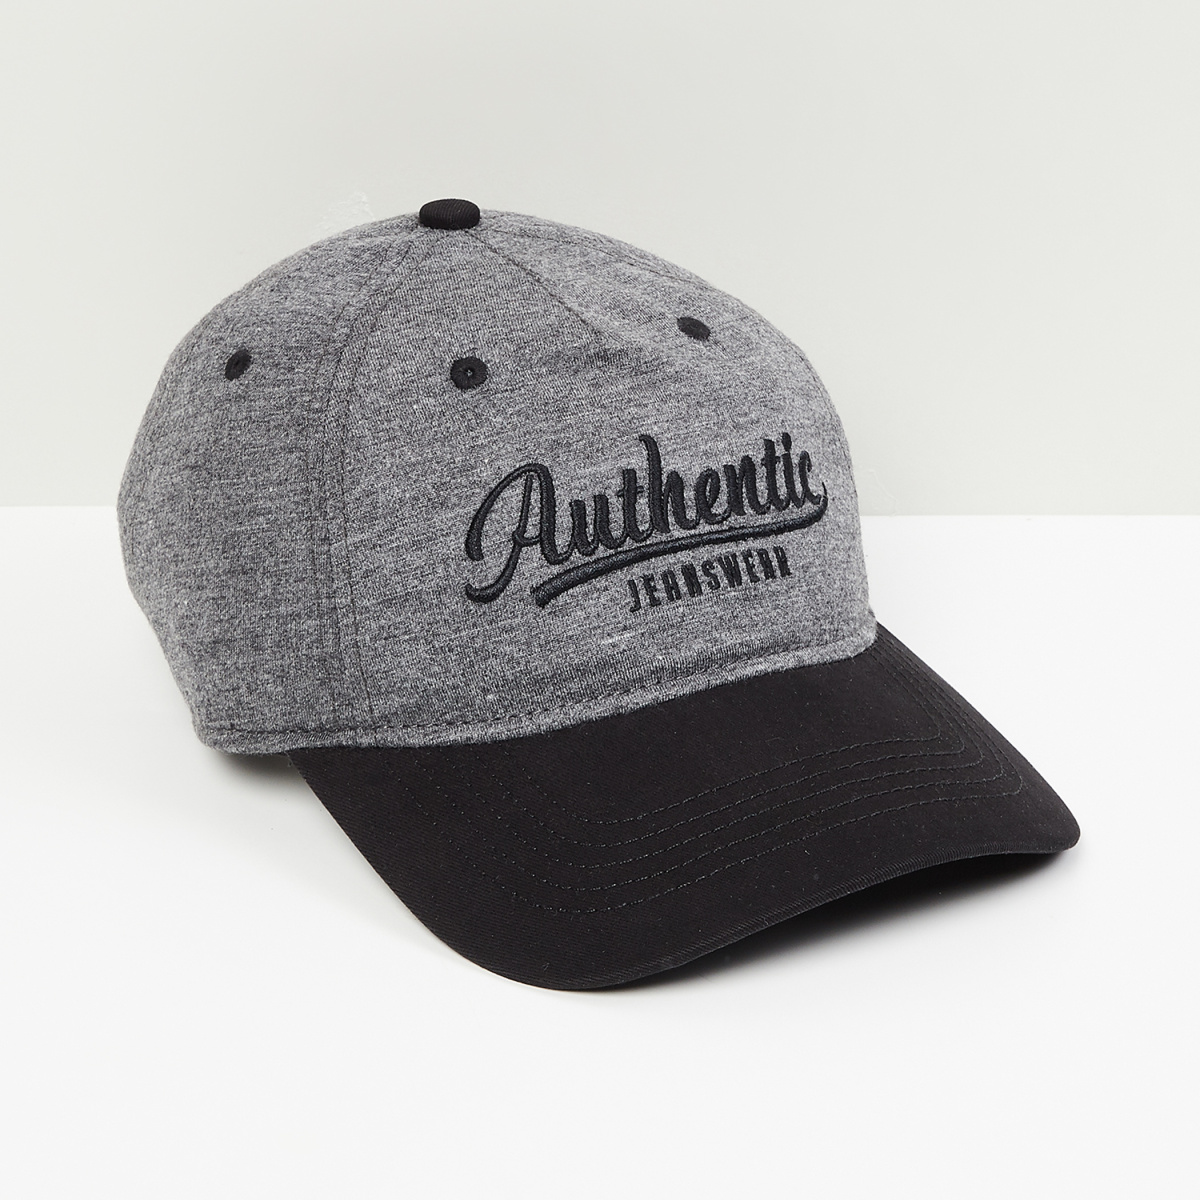 MAX Embroidered Cap